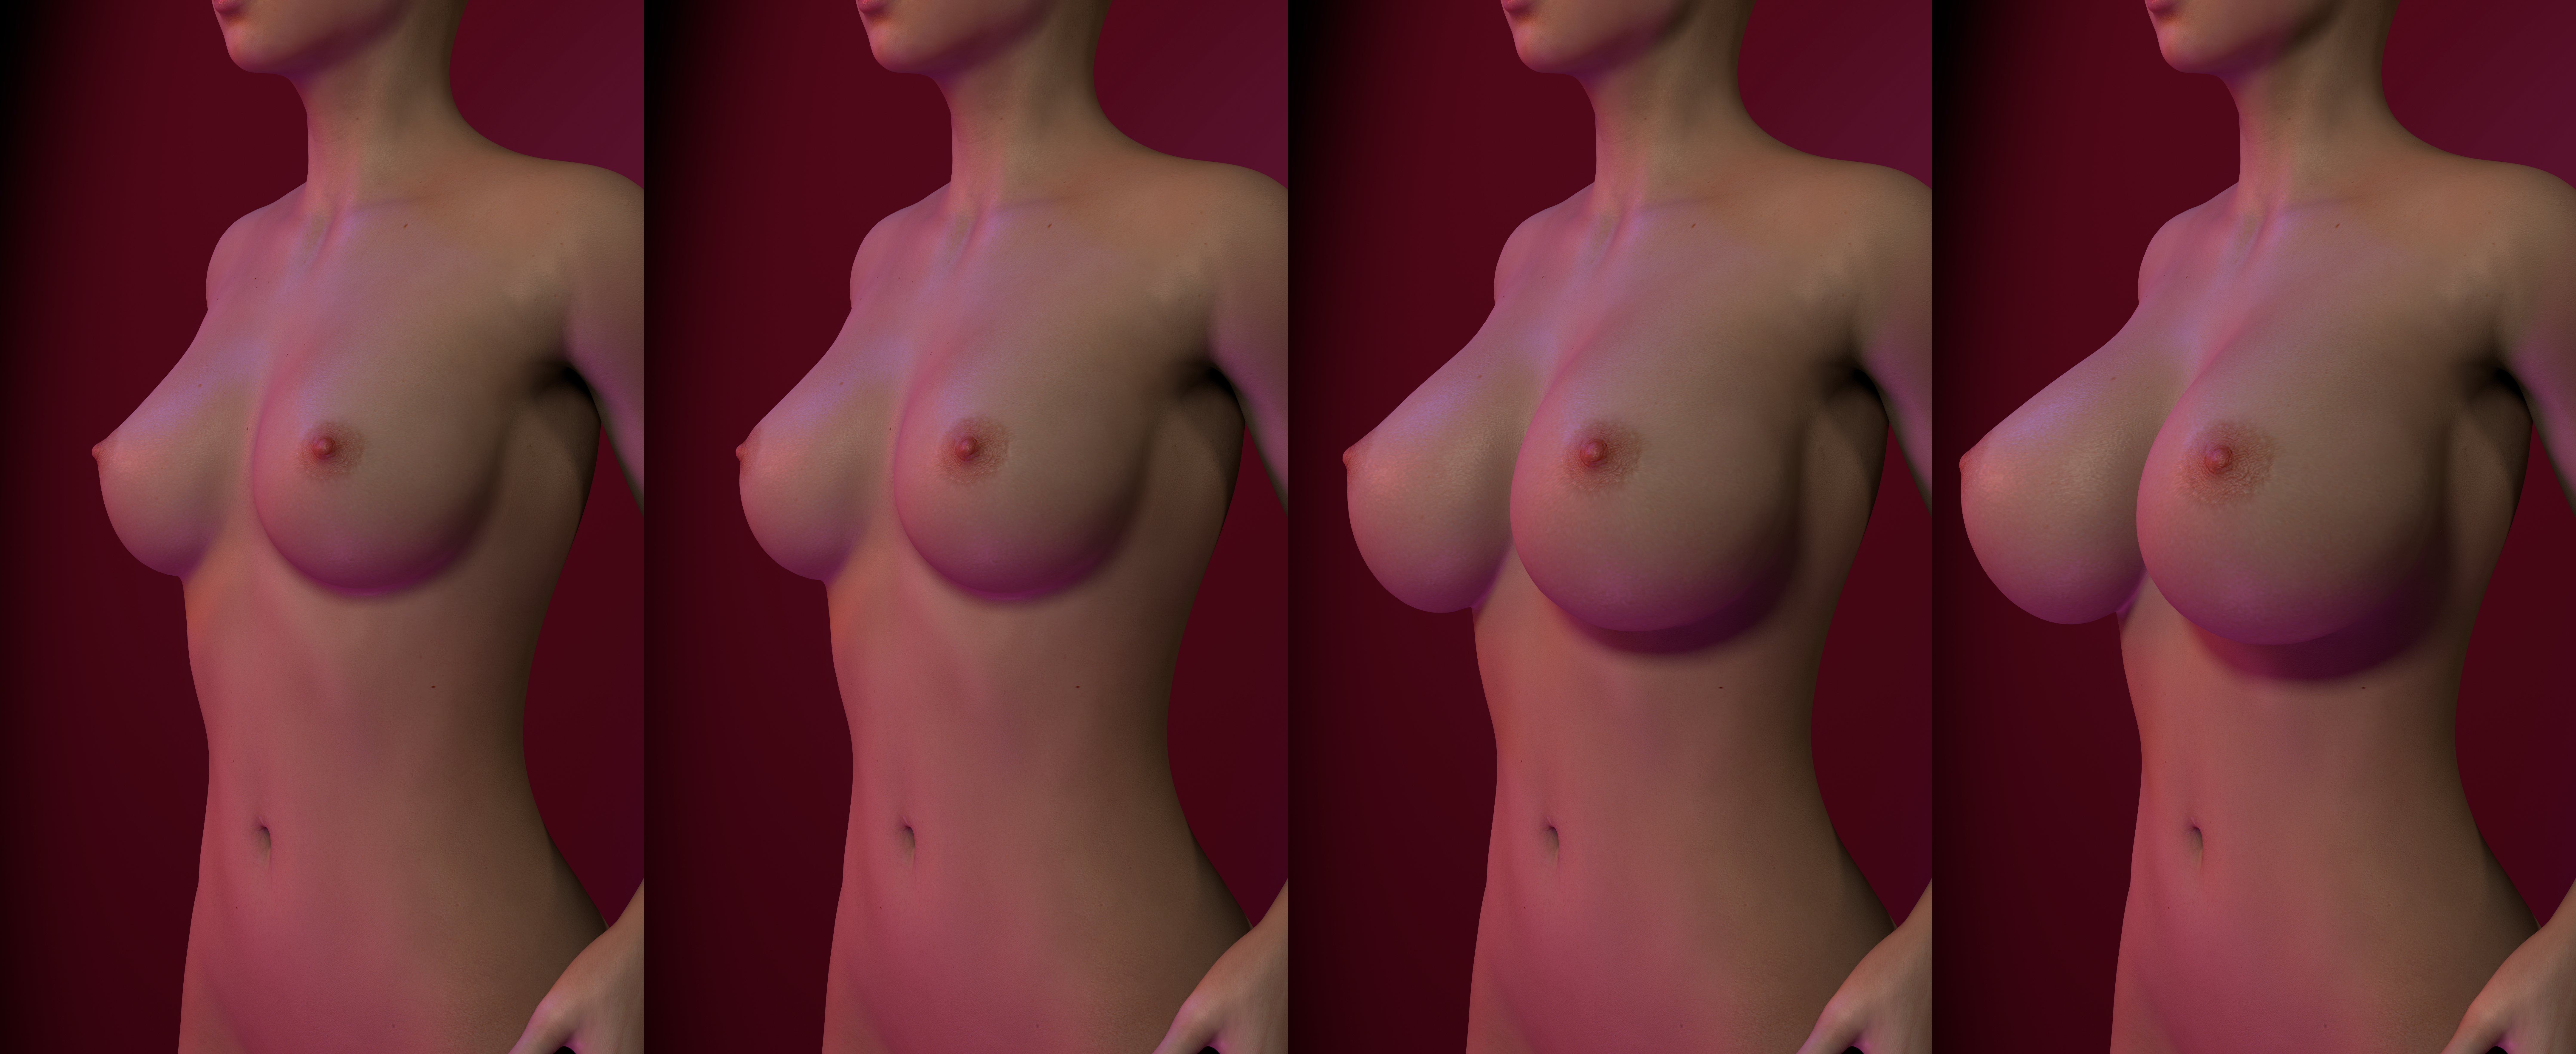 Breast Morphs Preview 2.png